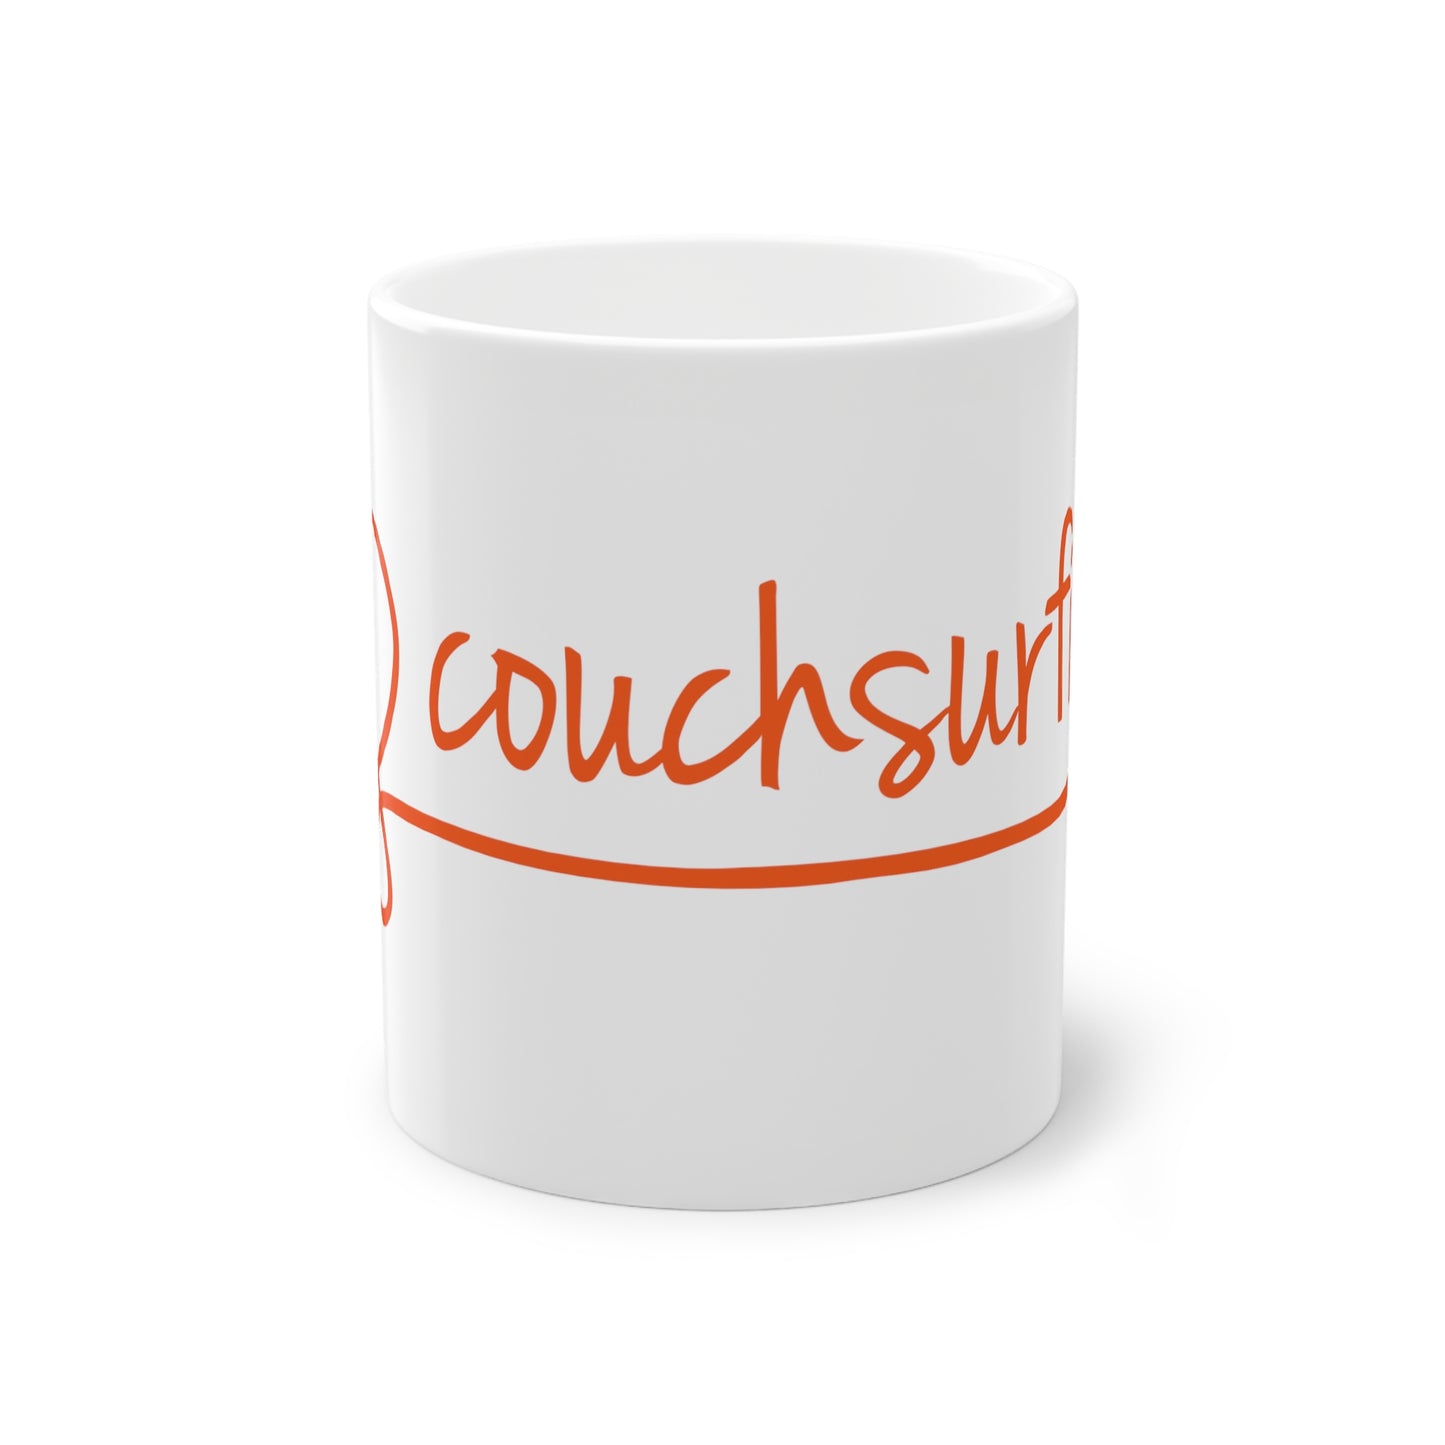 The Couchsurfing Mug